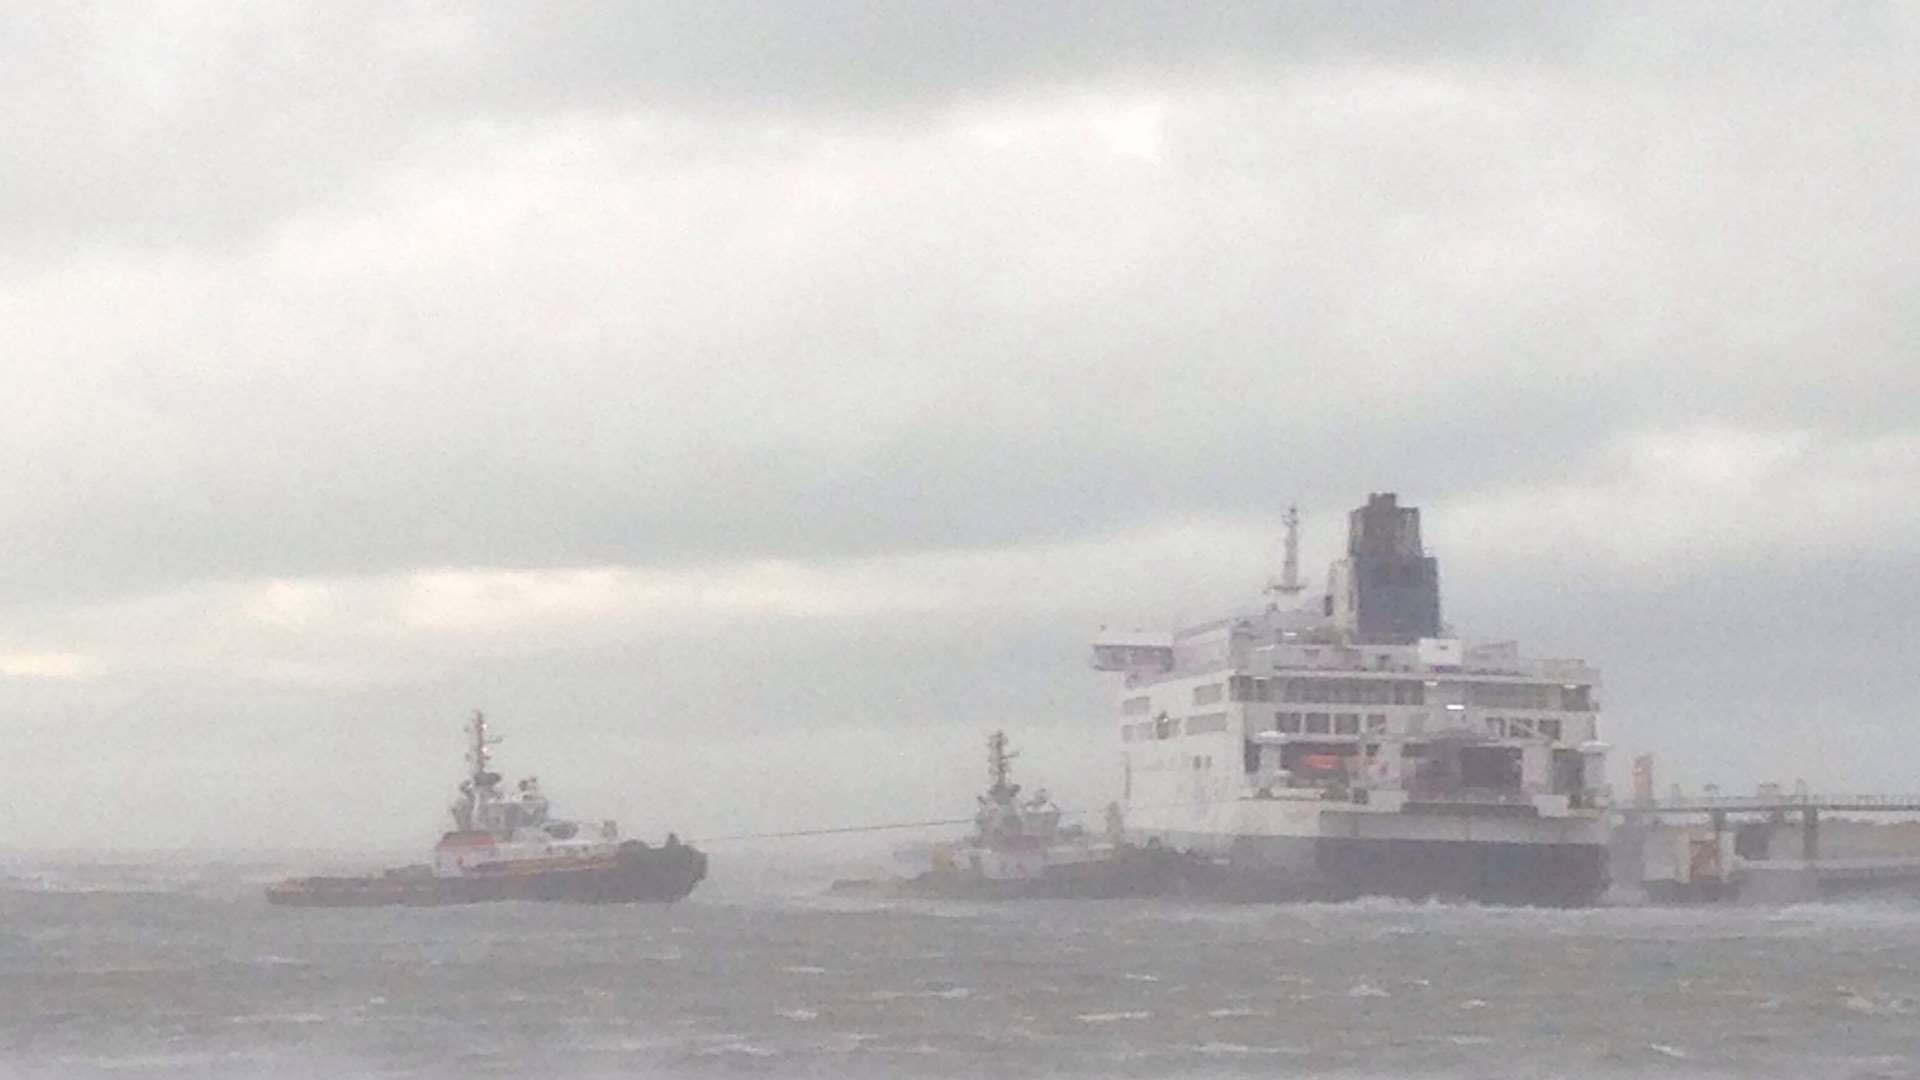 Tugs have been brought in to get the ferry to safety. Pic: Dean Carguillo